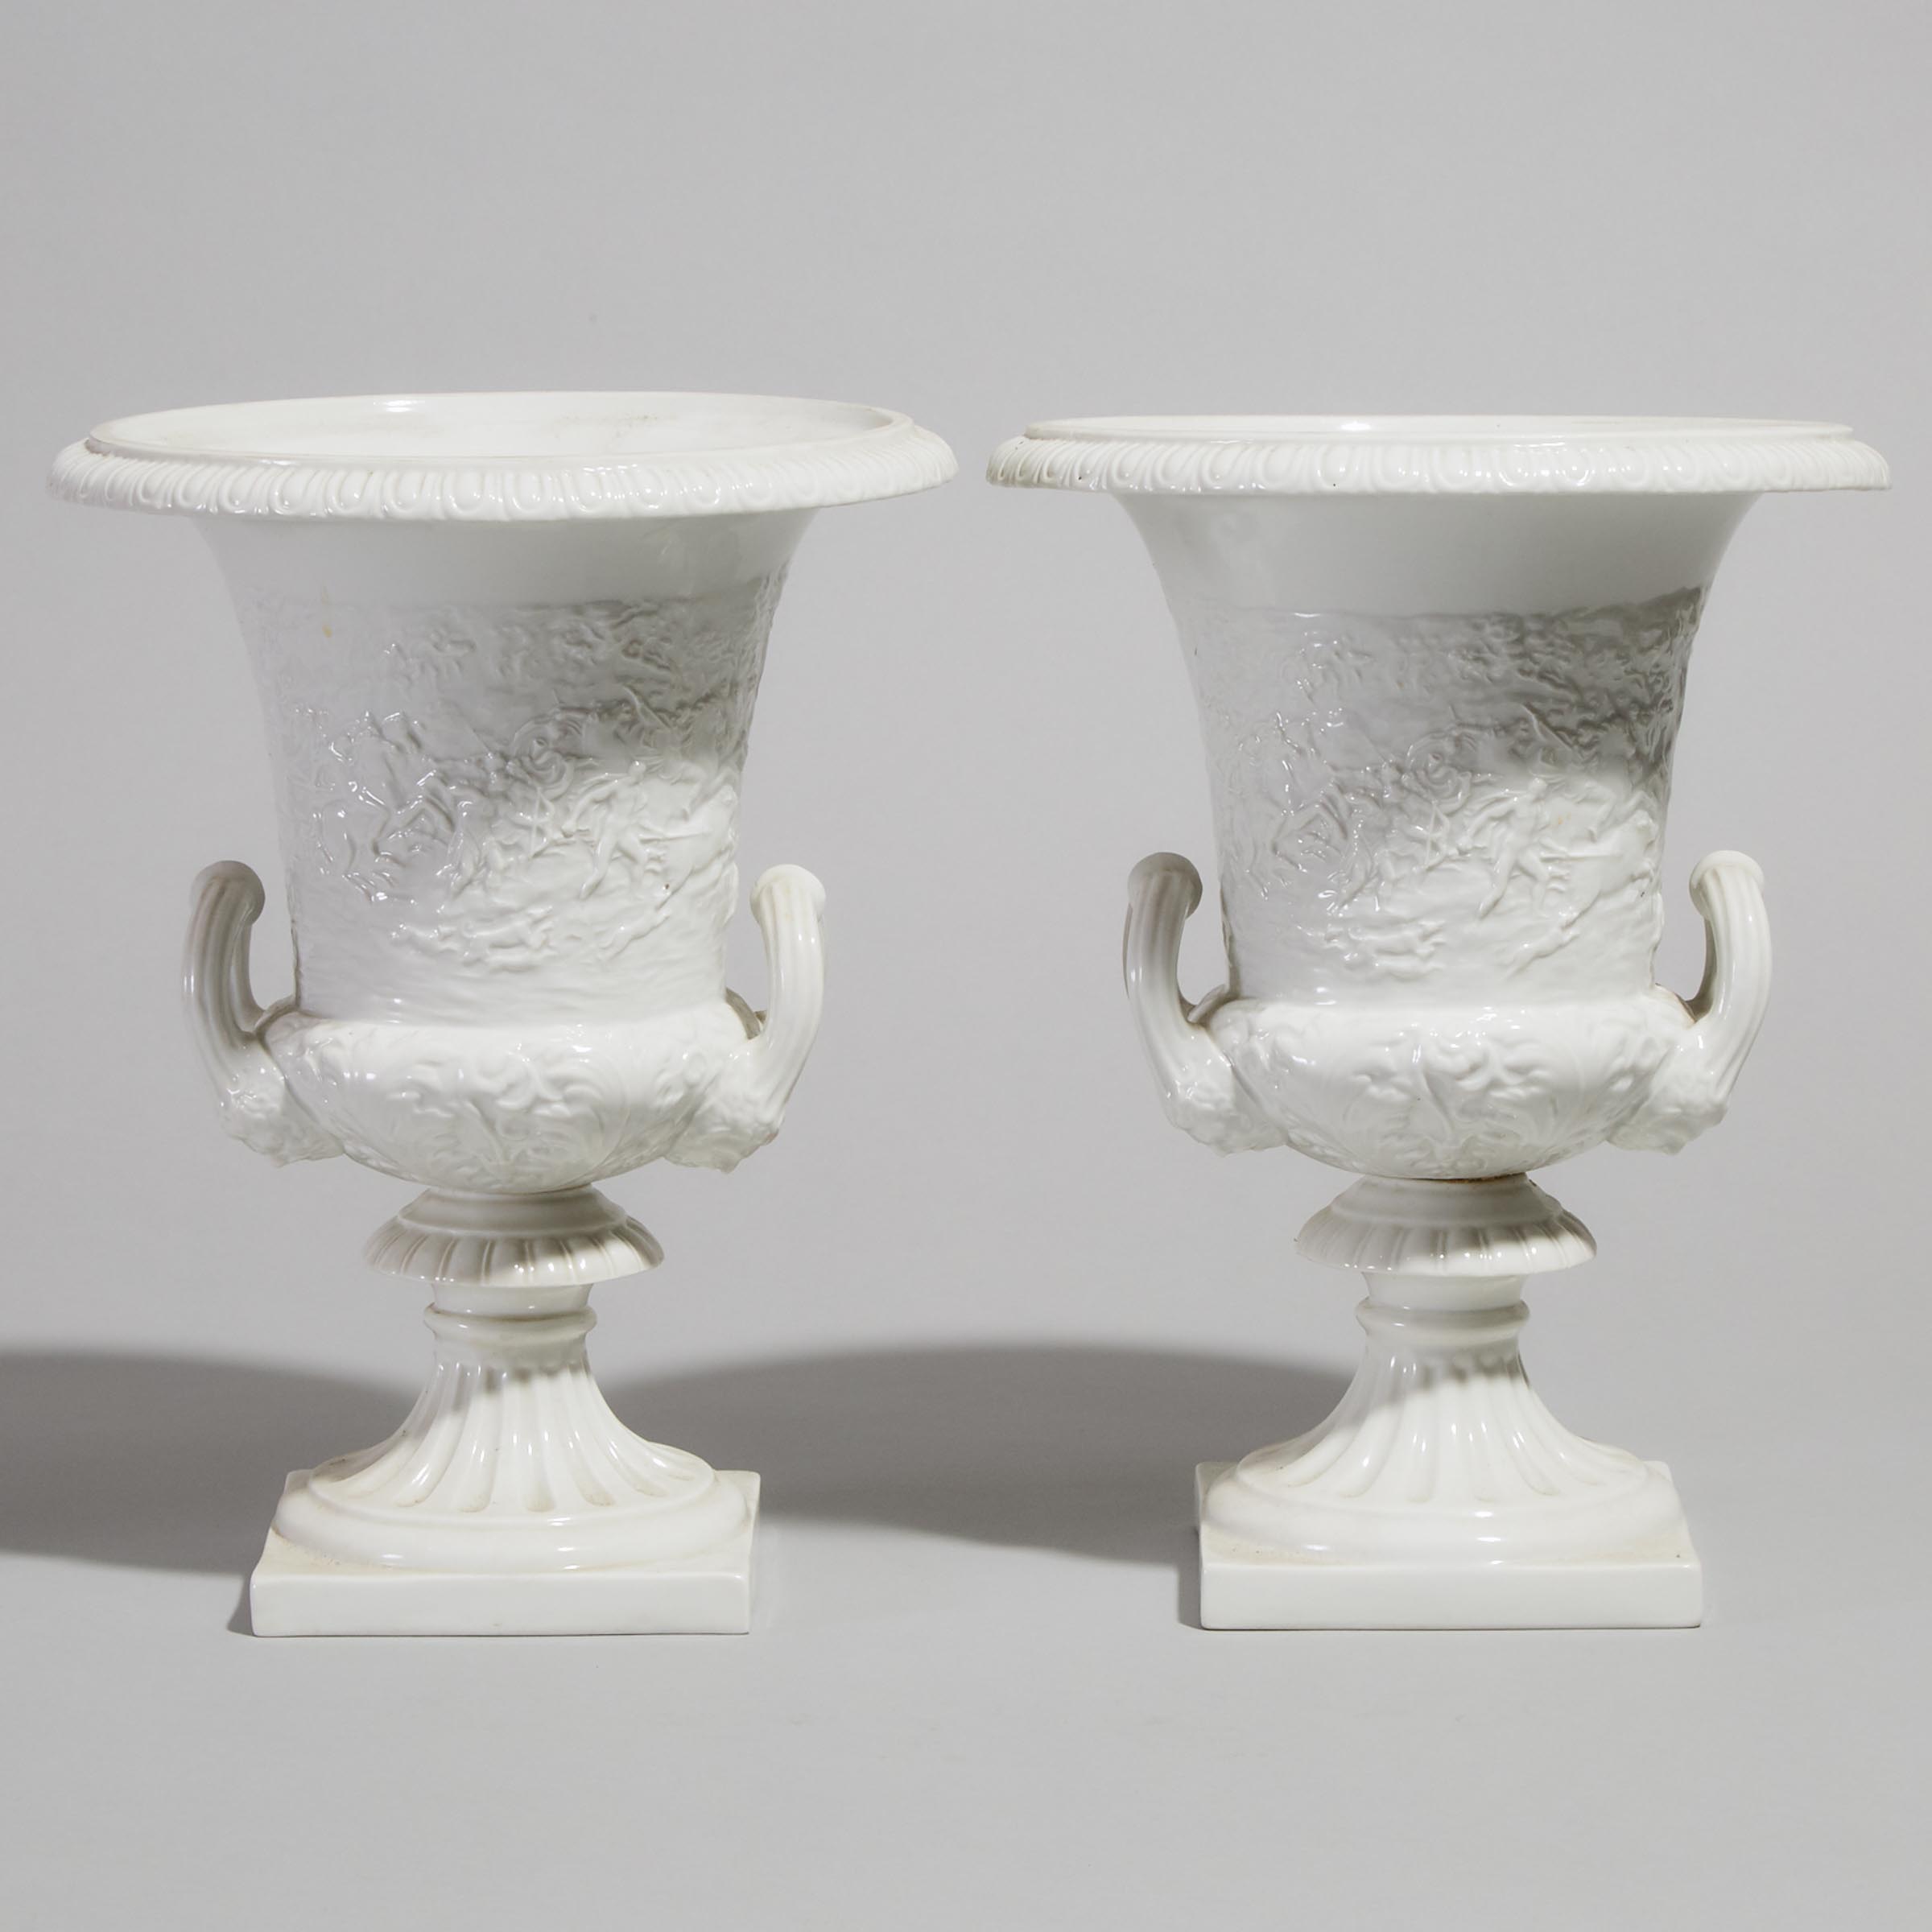 Pair of 'Naples' Moulded and White Glazed Campana Shaped Vases, 20th century